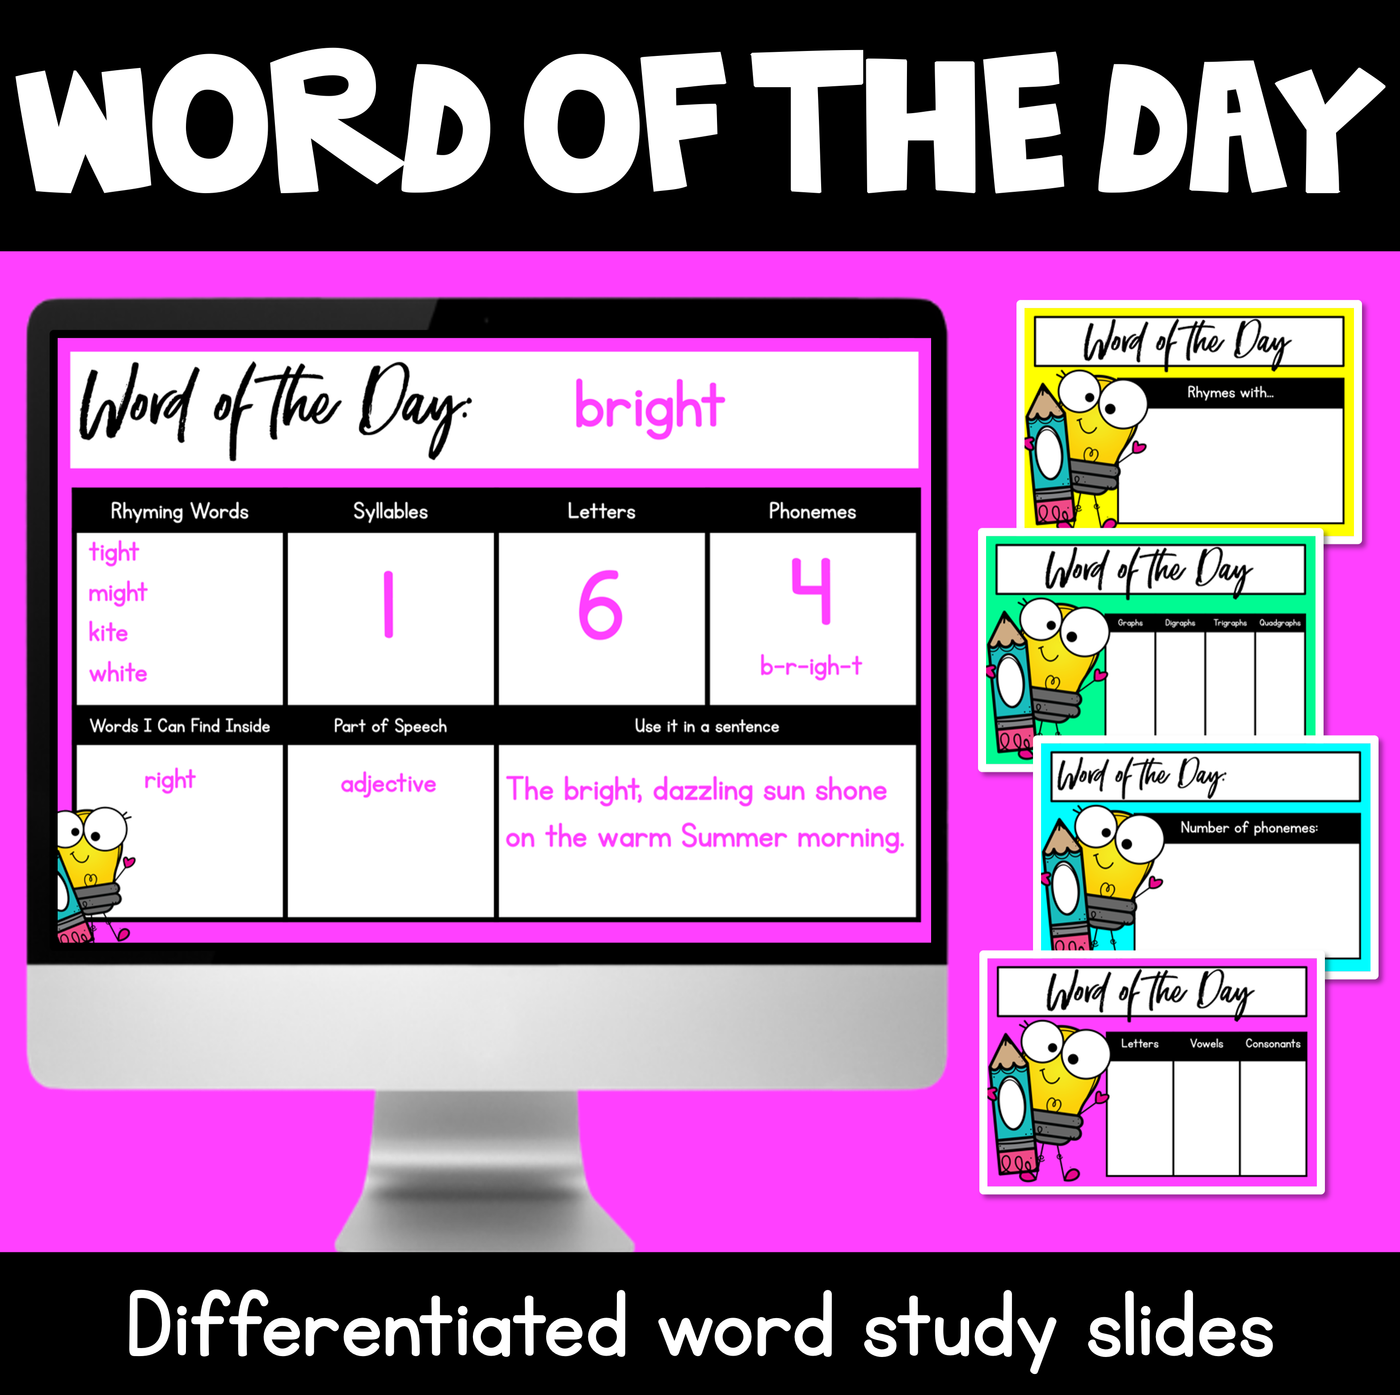 Word of the Day Slides